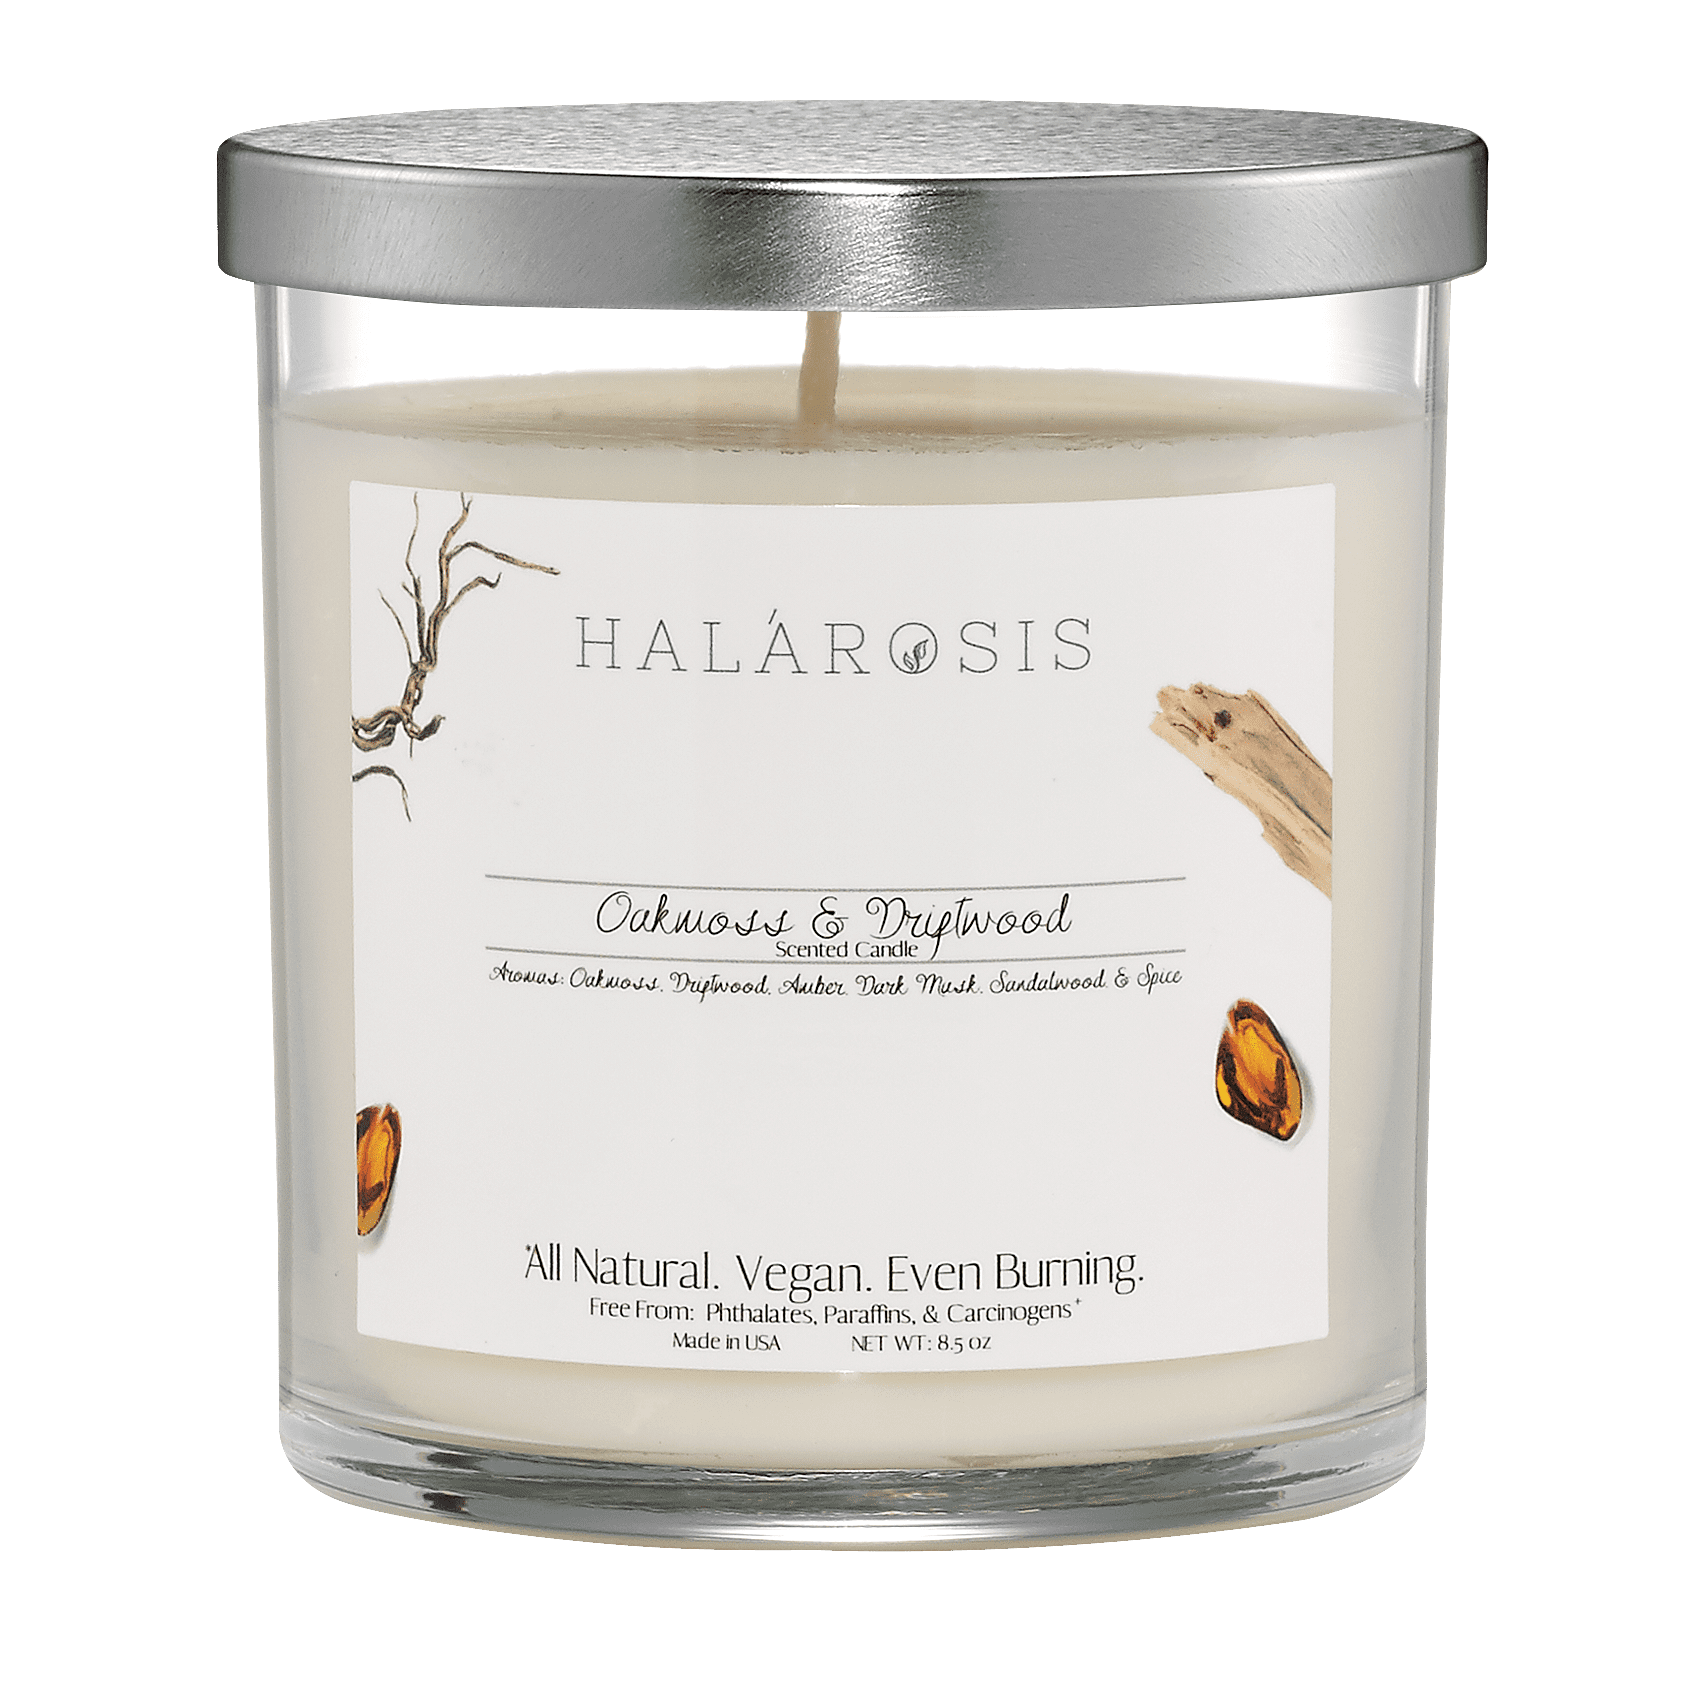 Driftwood Coconut Soy Candle Vegan Woodsy Scented Natural Candle Self-Care Gift Cedar Candle Aromatherapy Essential Oil Candle